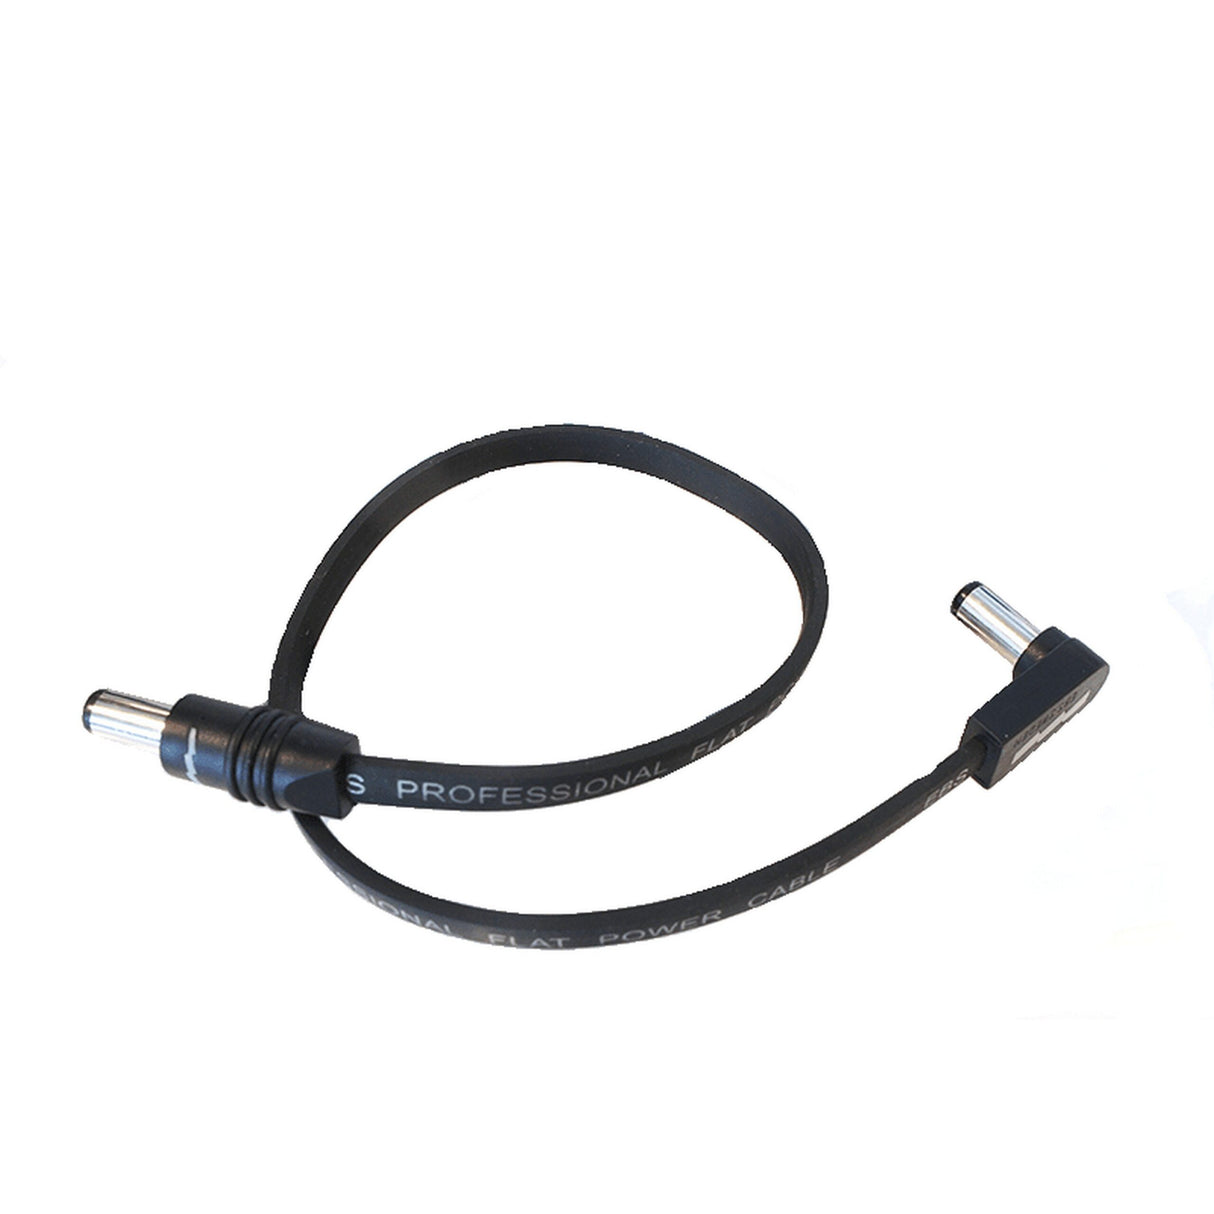 EBS DC1-38 90/90 Flat Power Cable, 38 Centimeters